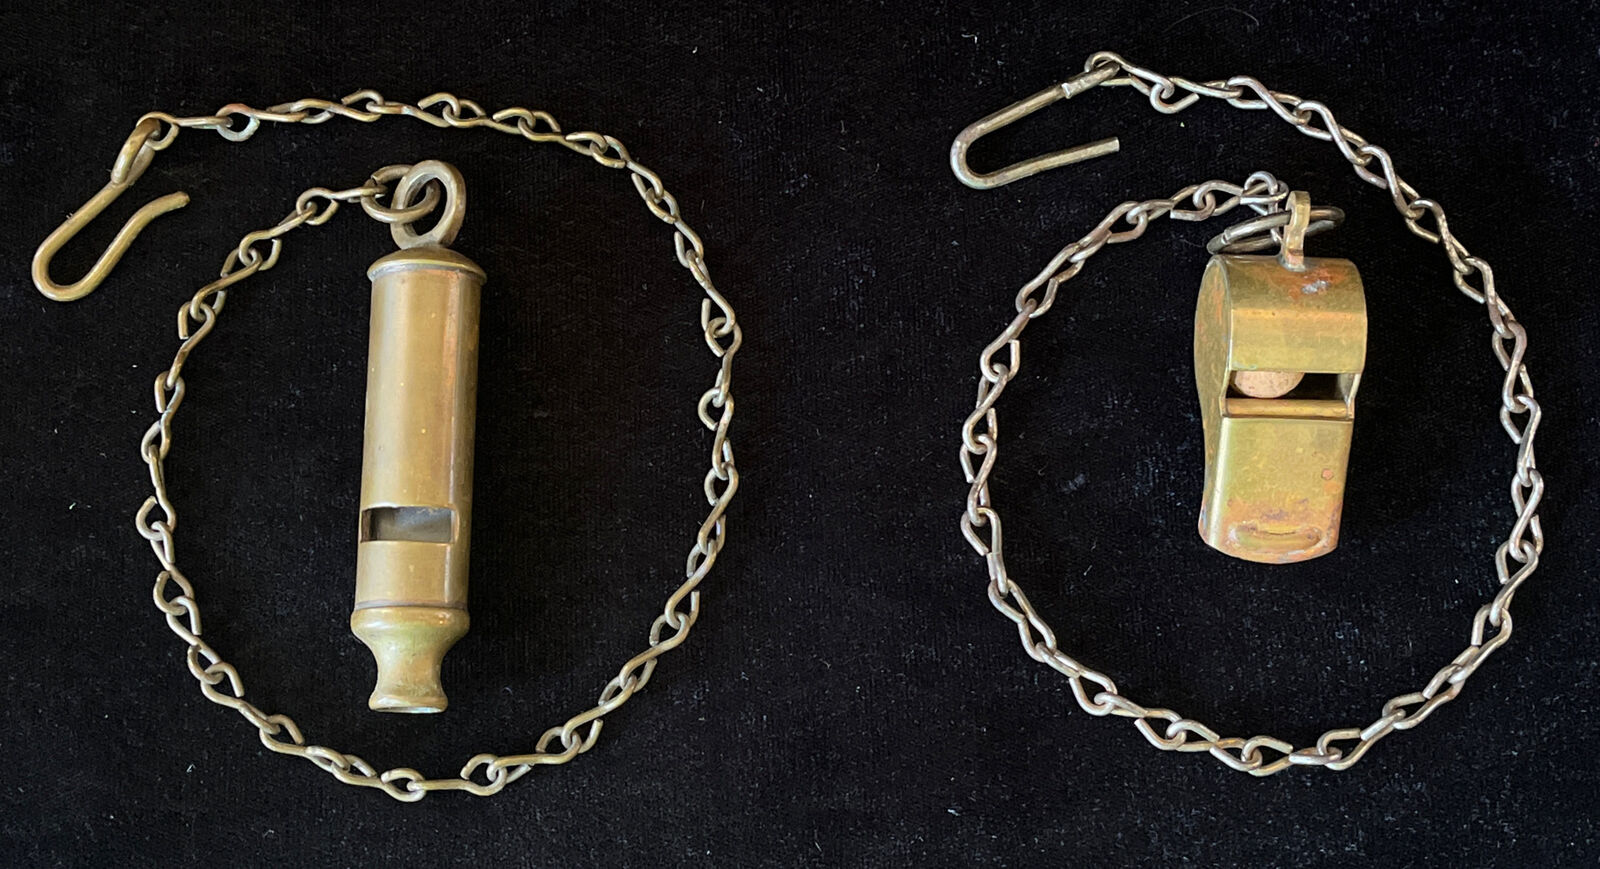 (2) Antique Vintage Metal & Brass MILITARY / POLICE Whistle with Chain & Hook